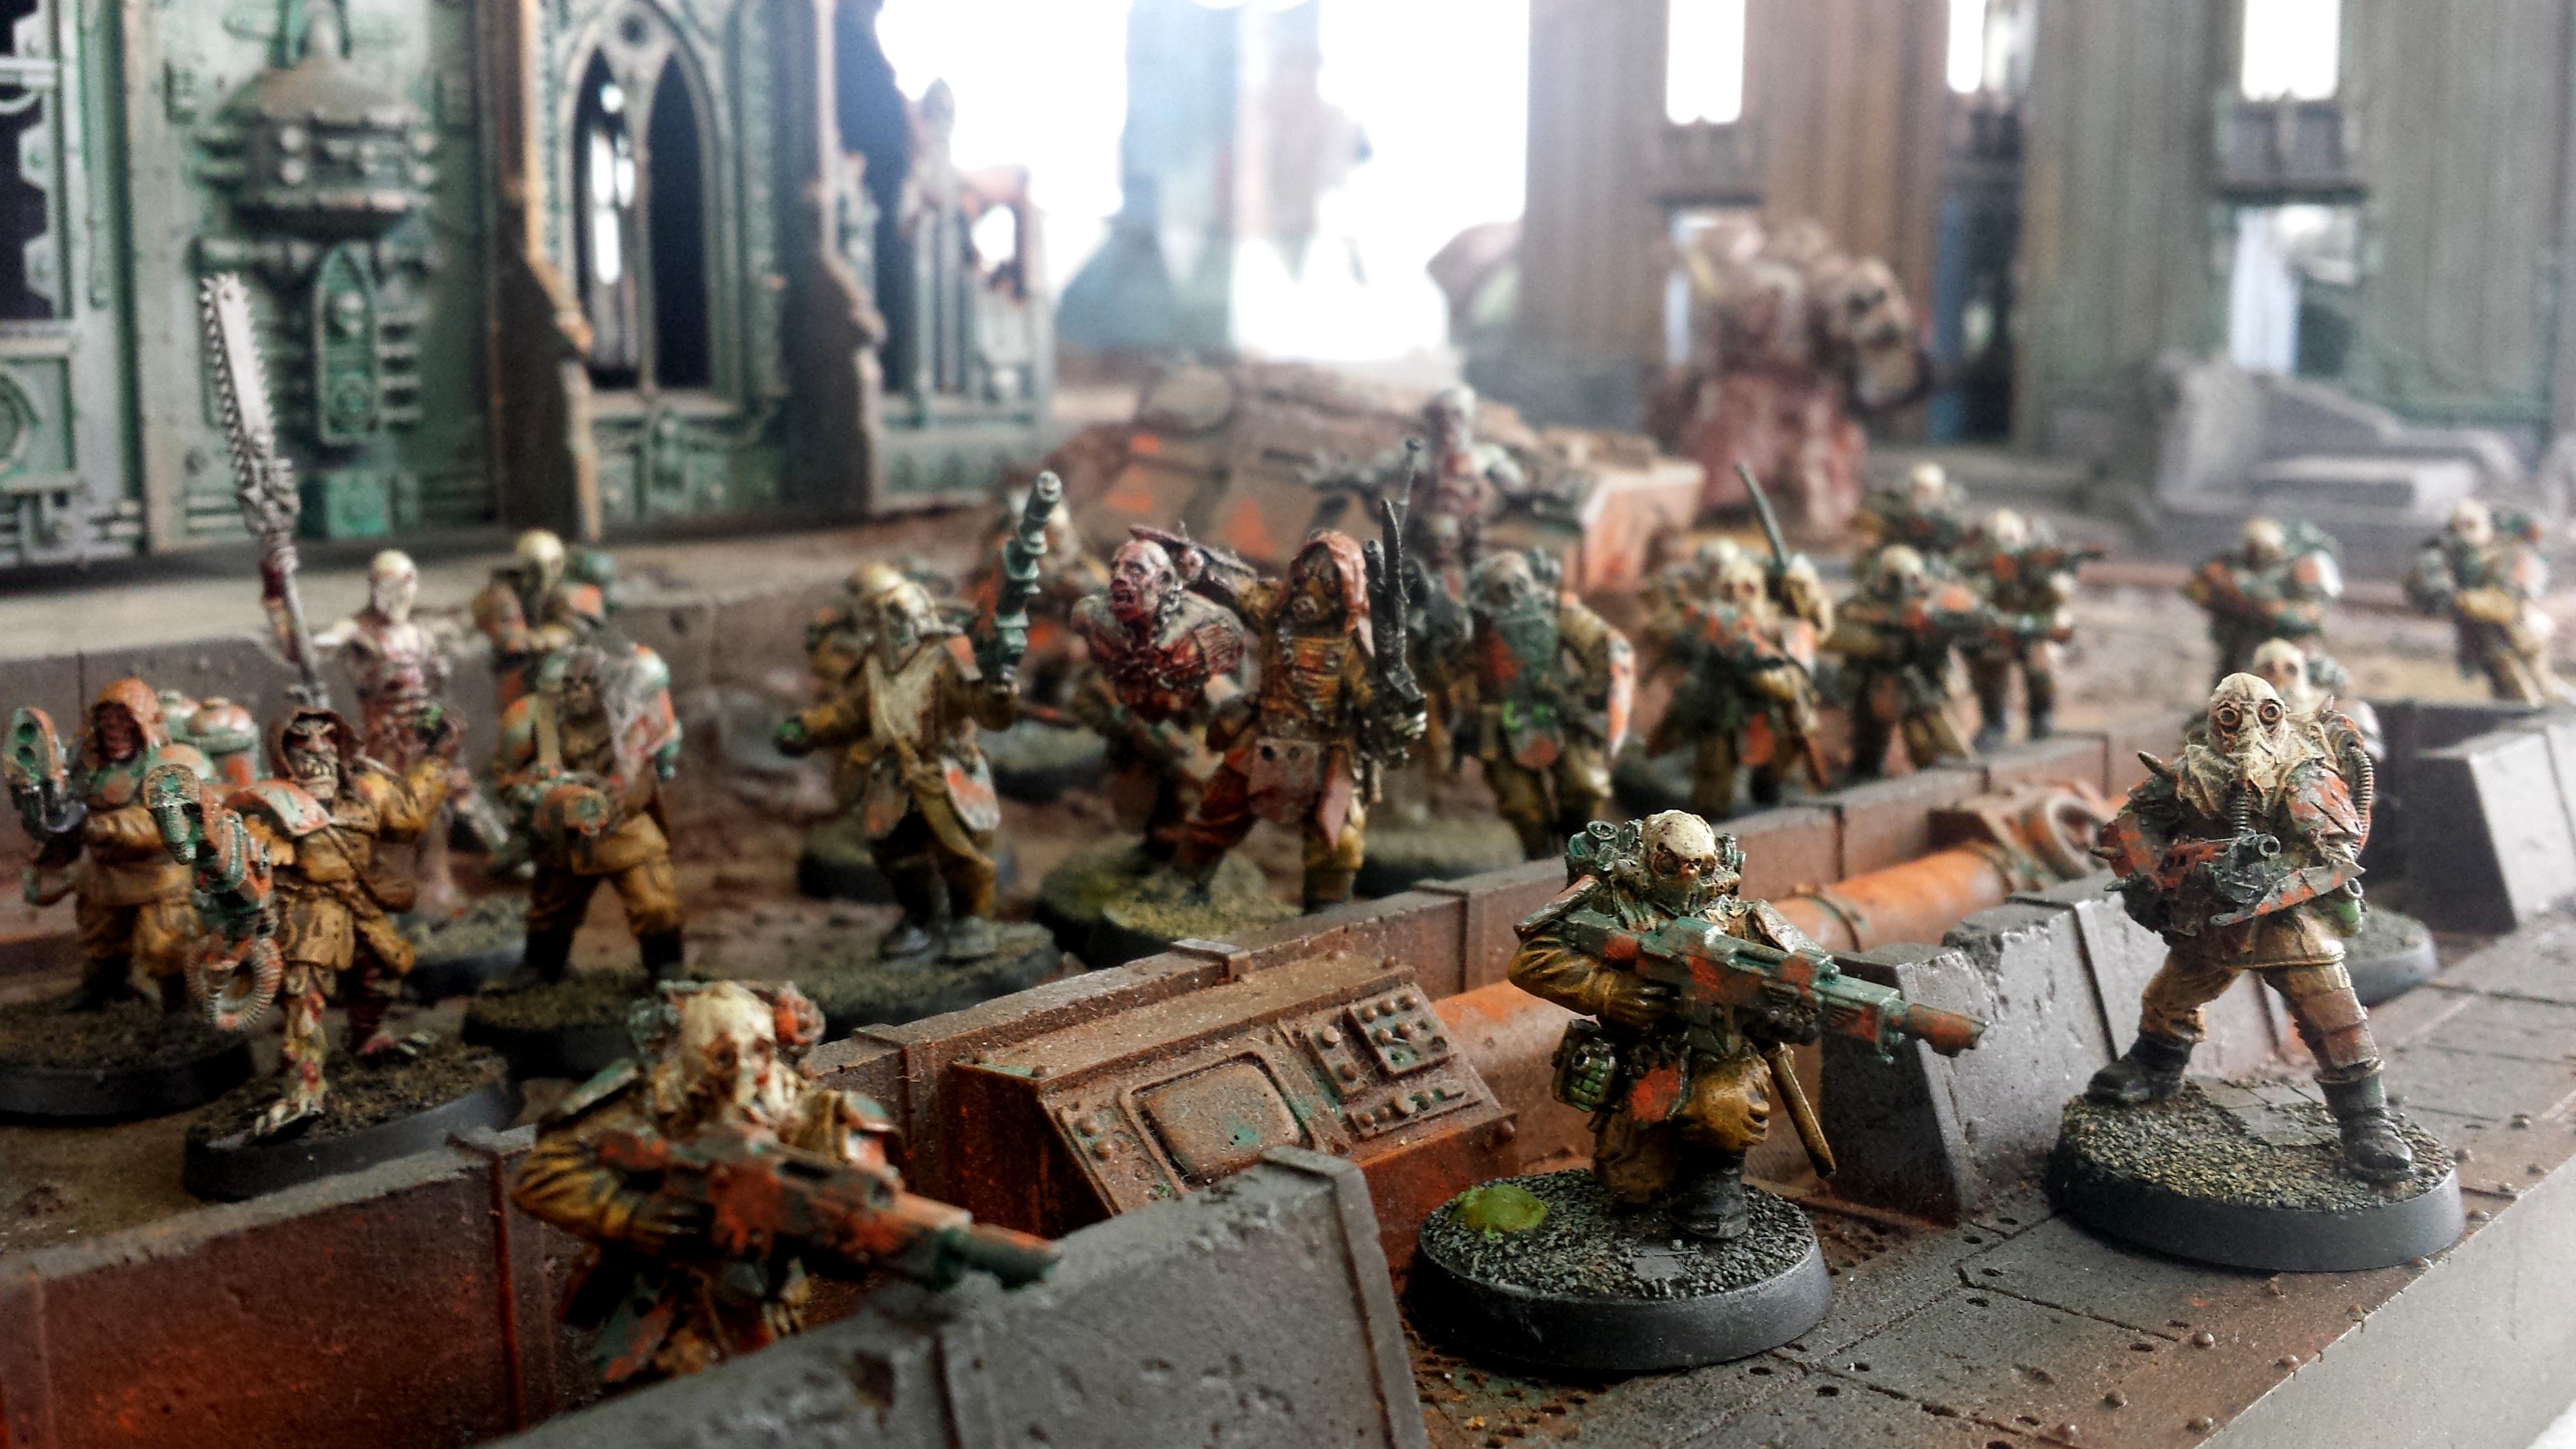 Apostles Of Contagion, Chaos, Forge World, Nurgle, Rogue Psyker, Warhammer 40,000